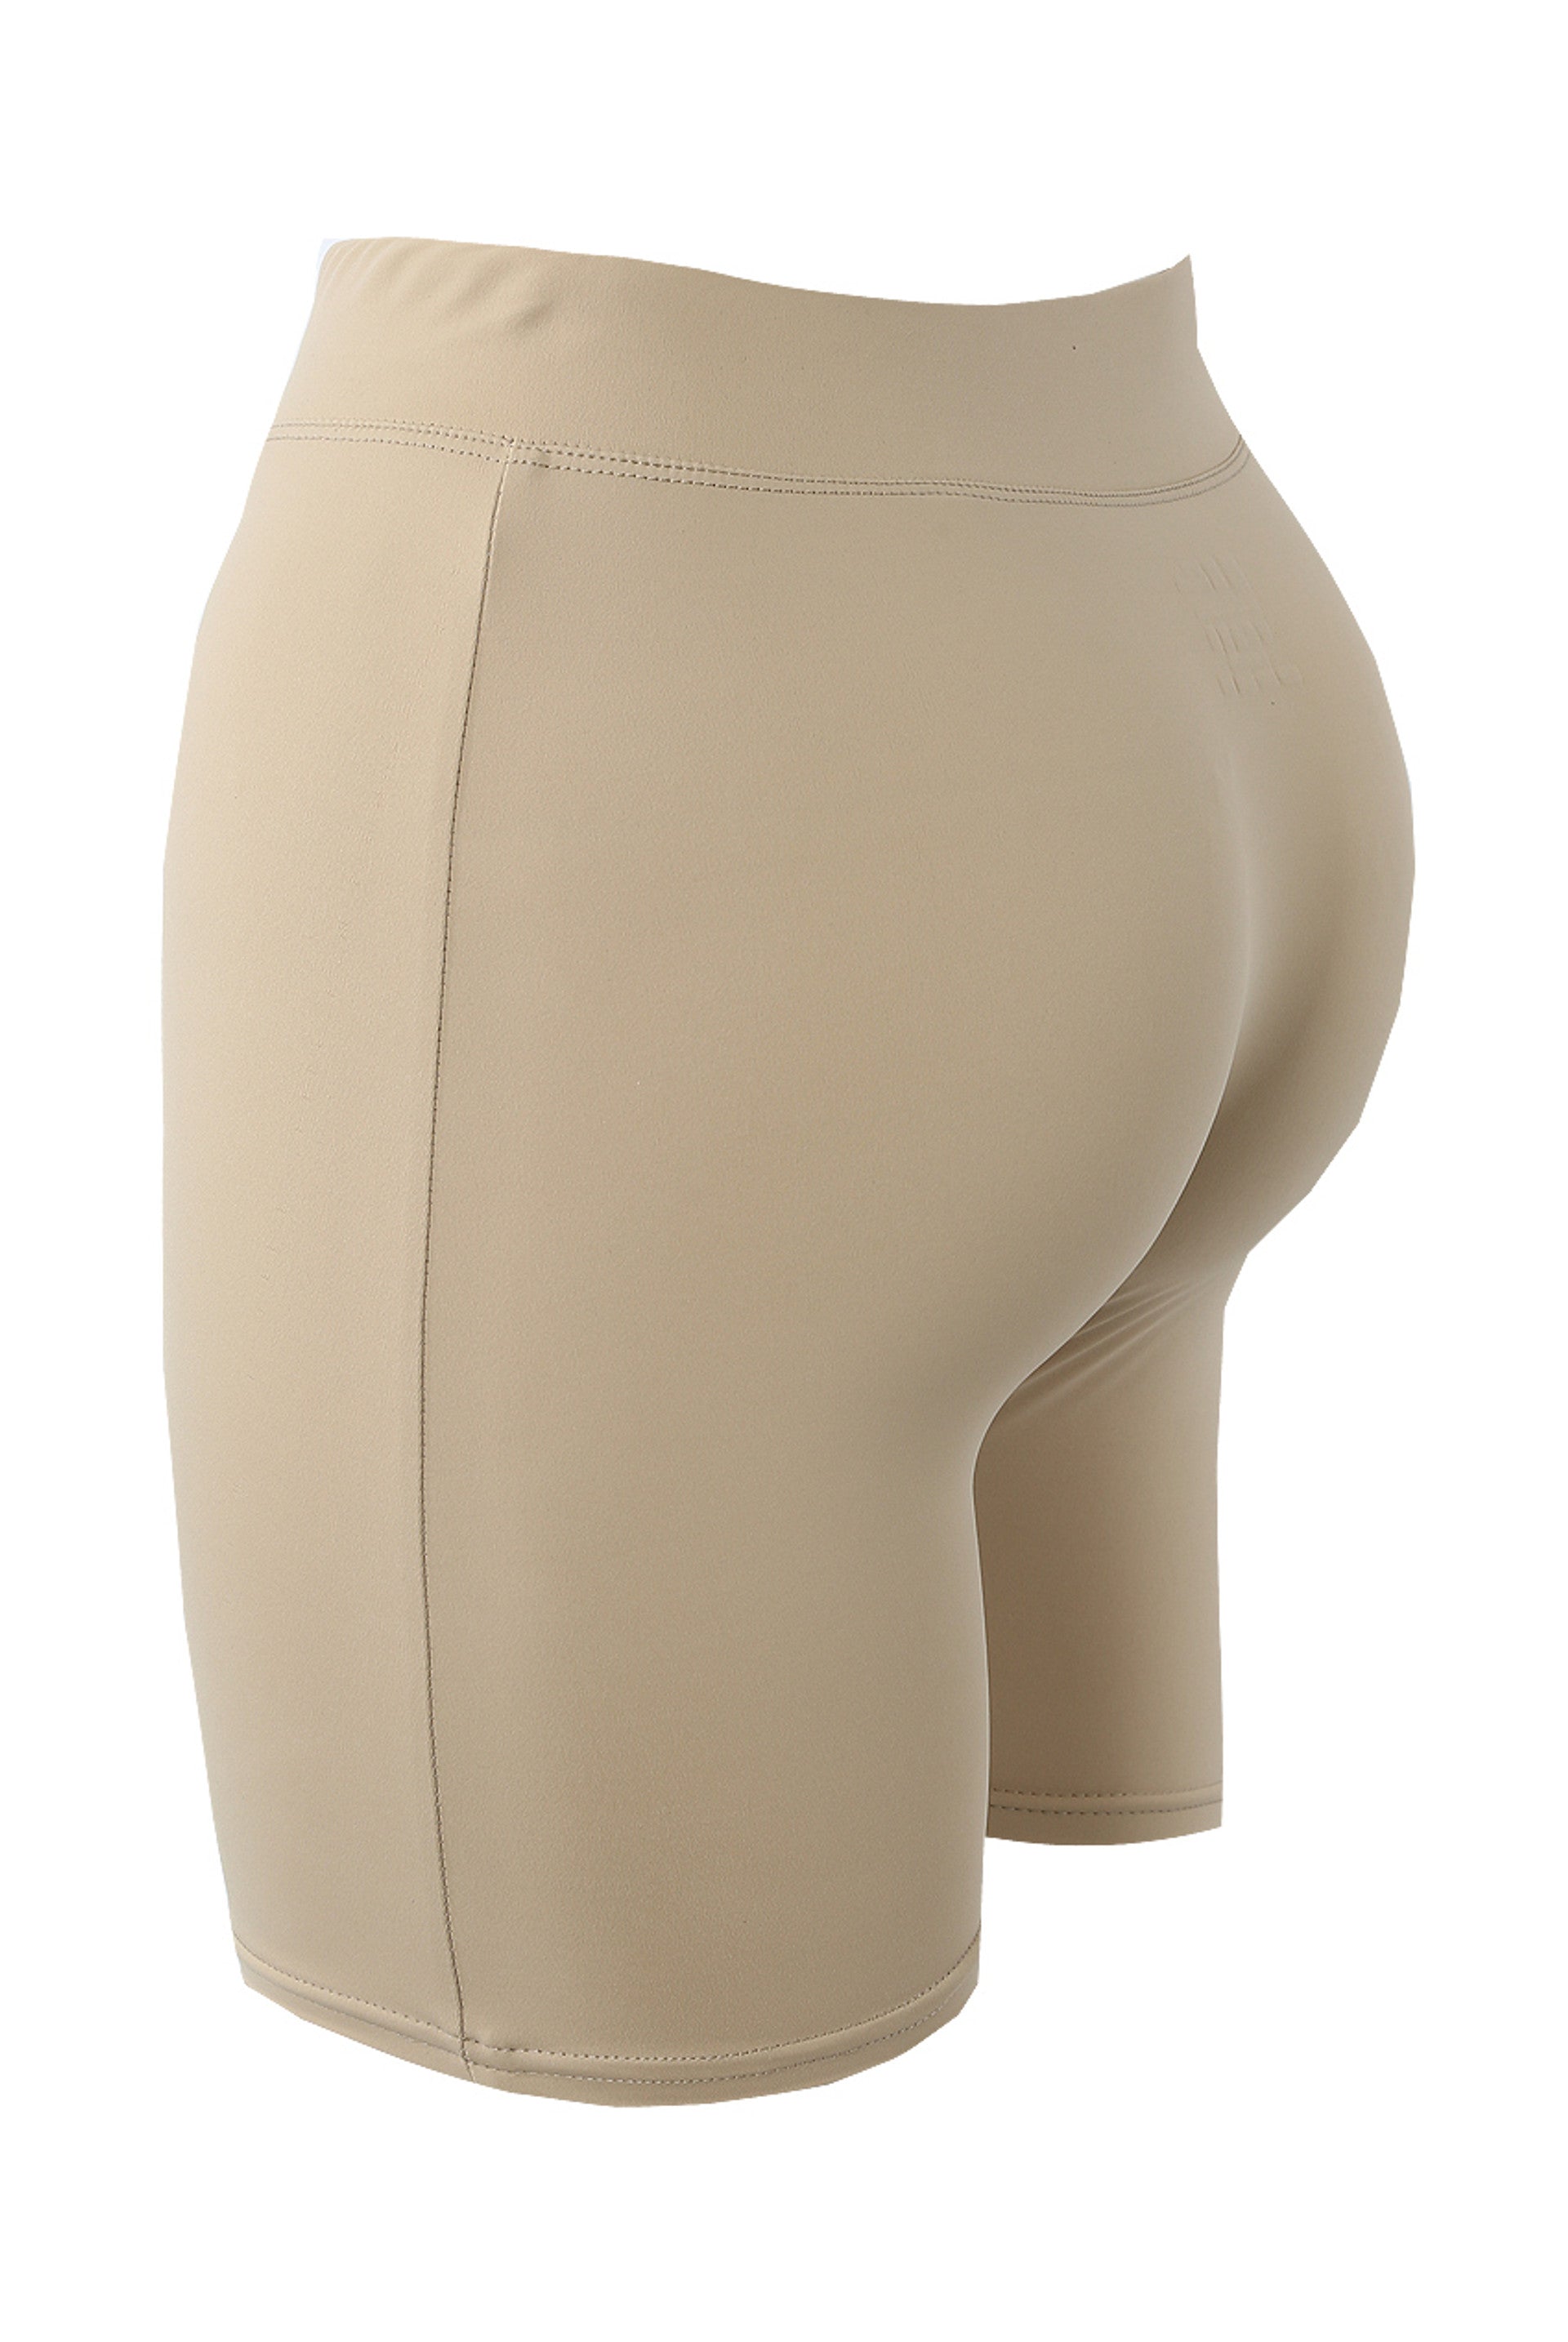 Tan High Waisted Cycling Shorts - Hallie - Storm Desire